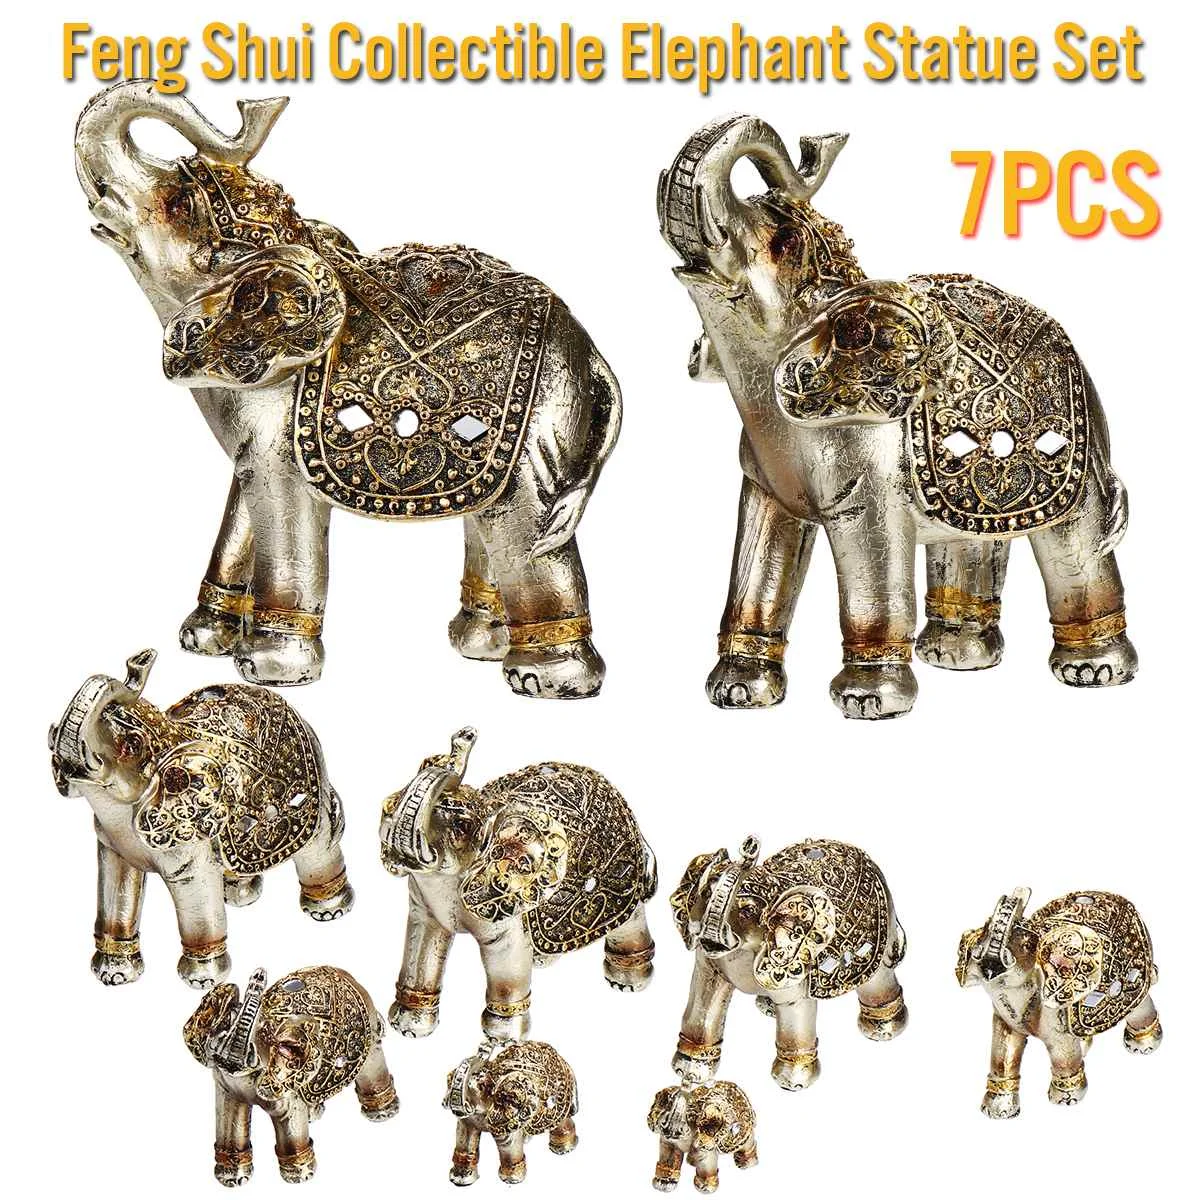 

7Pcs/Set Feng Shui Elephant Statue Ornaments Lucky Wealth Figurine Resin Crafts Gift Home Office Decoration